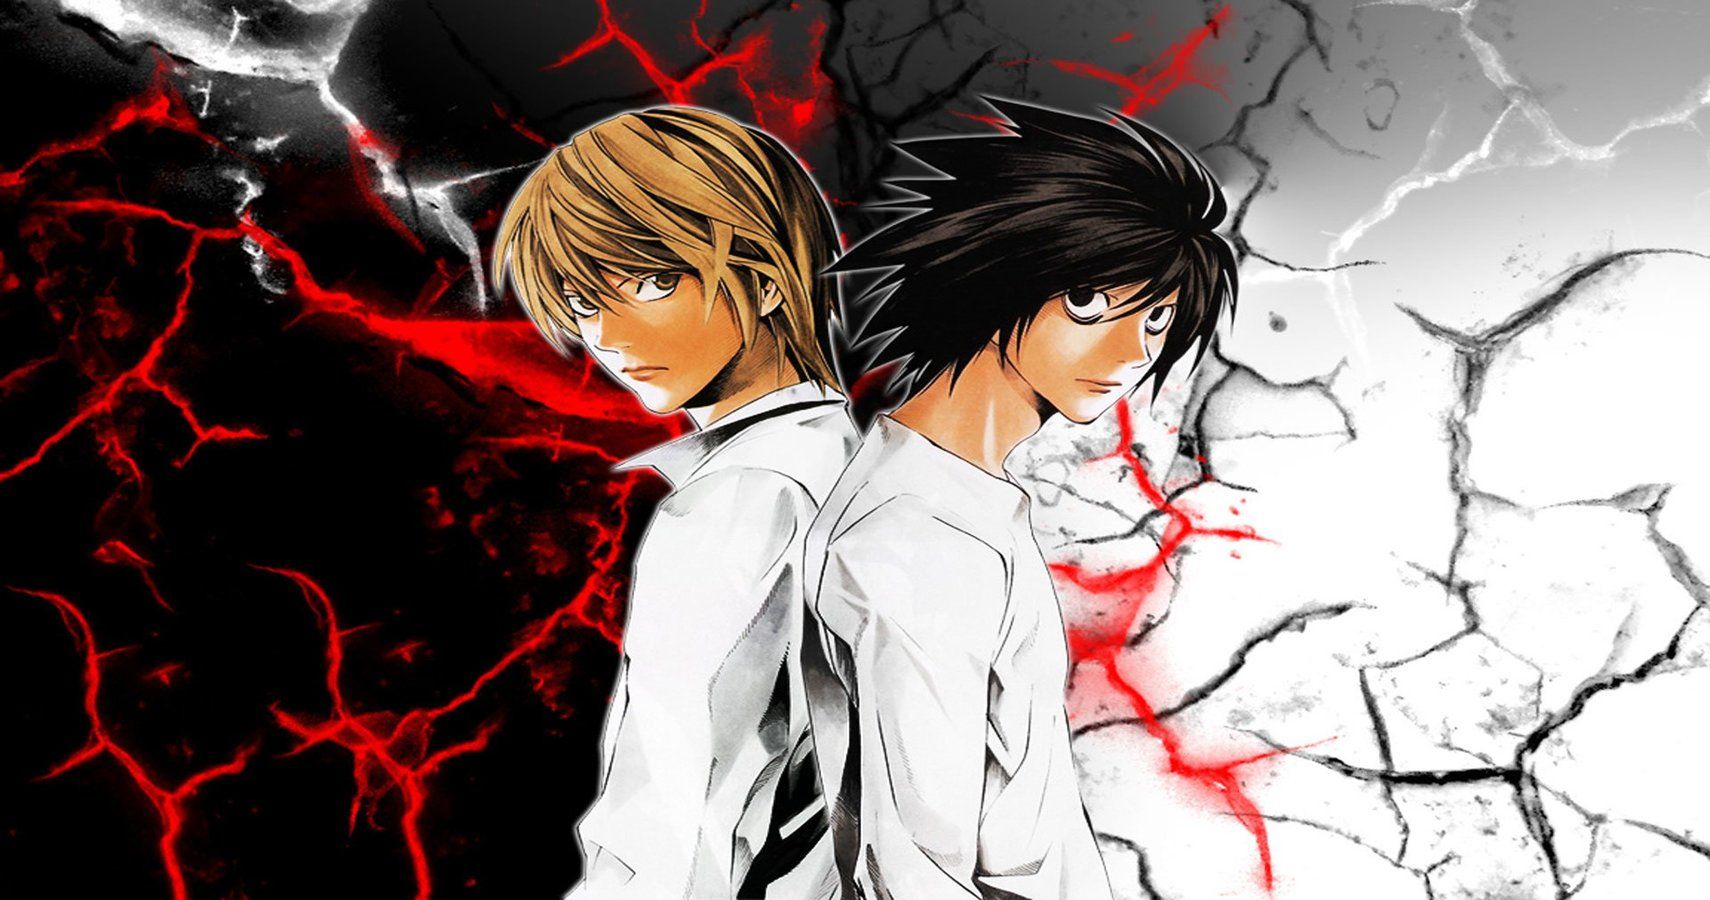 Death Note Making A Return After 14 Years With New 87-Page Manga Chapter |  Geek Culture